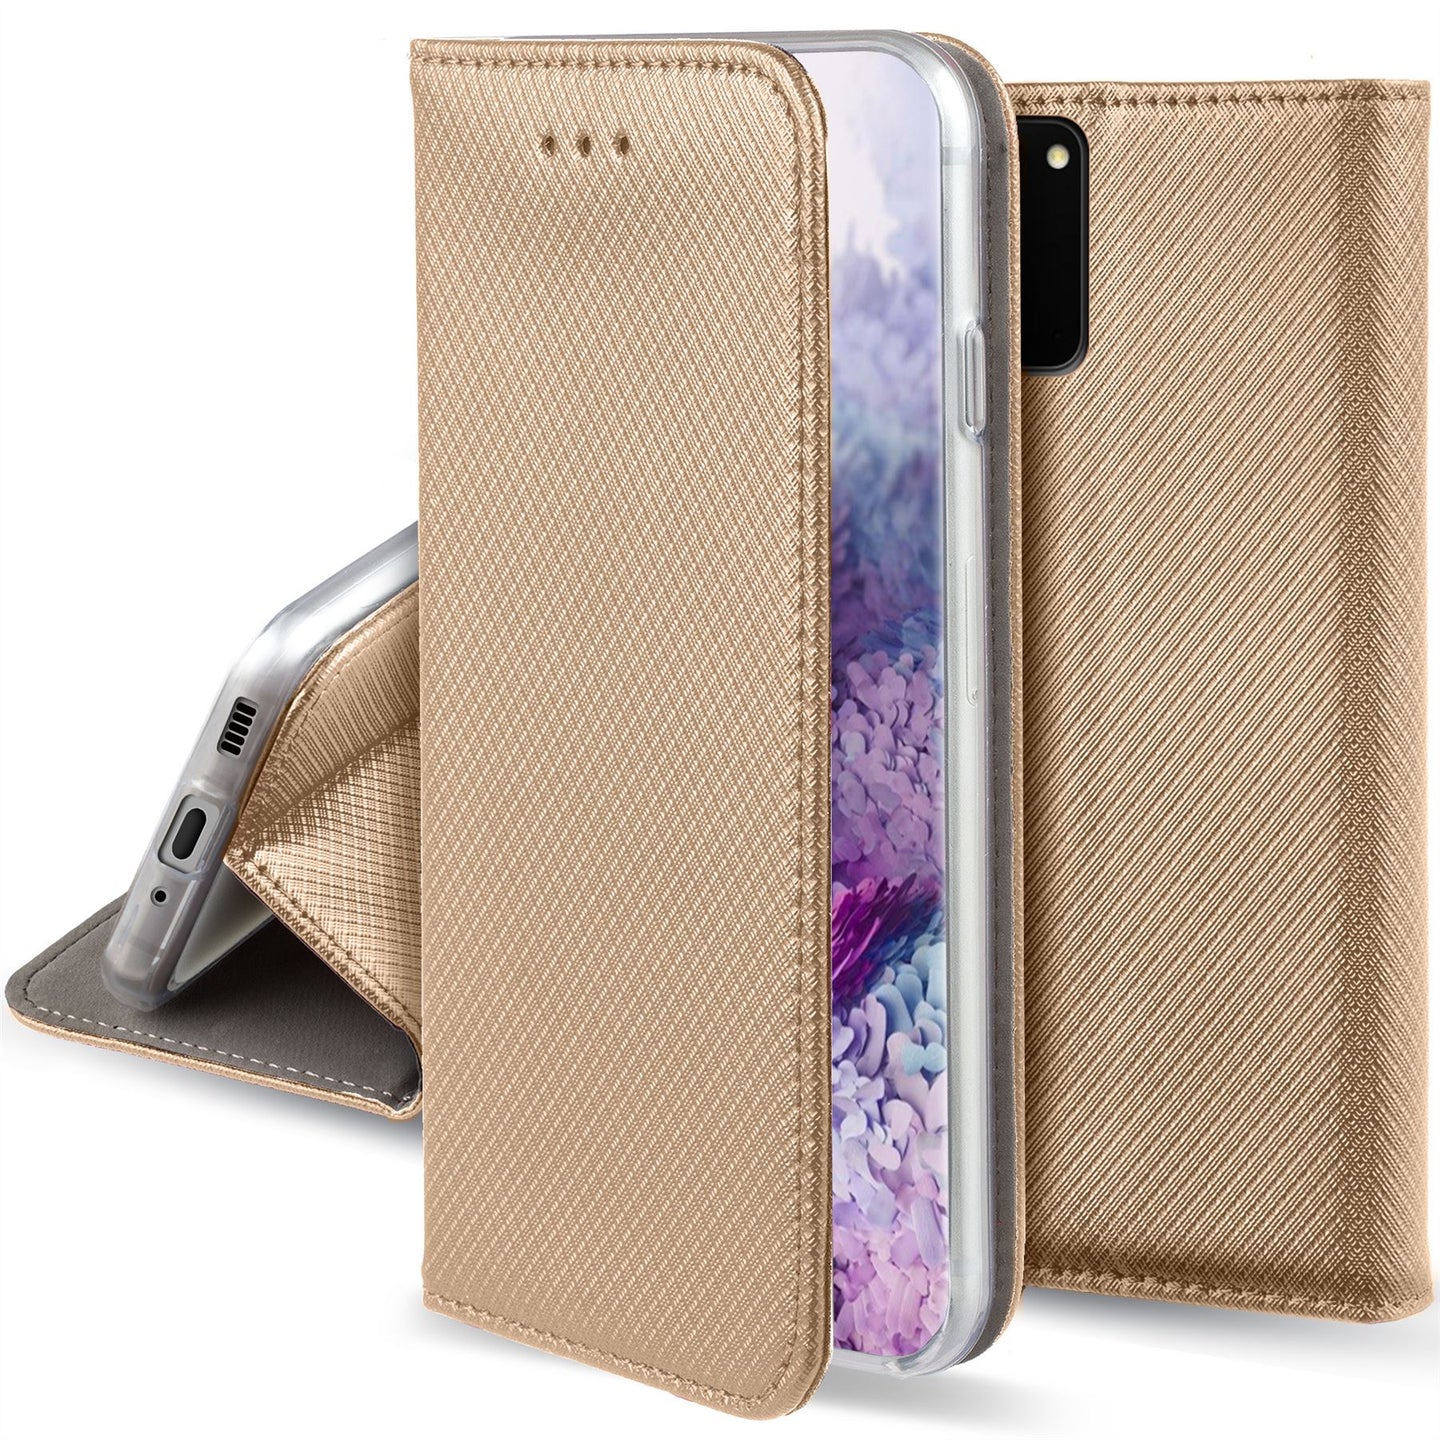 Moozy Case Flip Cover for Samsung S20 Plus, Gold - Smart Magnetic Flip Case with Card Holder and Stand